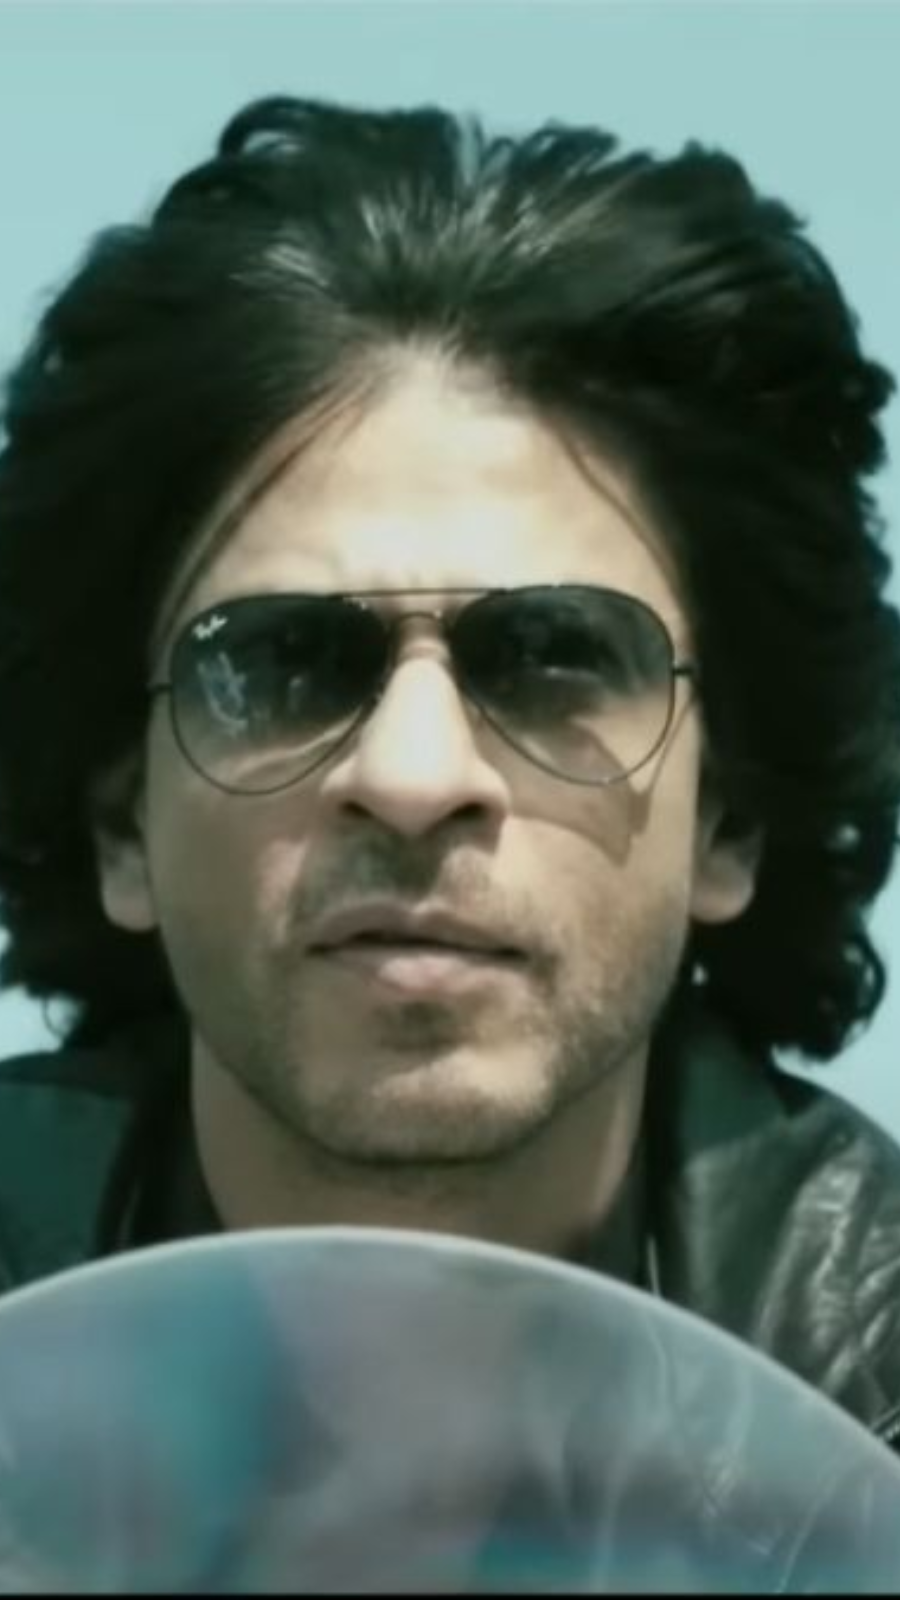 Jawan Prevue Decoding: Shah Rukh Khan As 'Sanki' (Earlier Title), Om...  Tattoo On His Bald Head With A 'Lion' Ring - Things That Make You Go 'WTF,  We Can't-Wait' For This Atlee